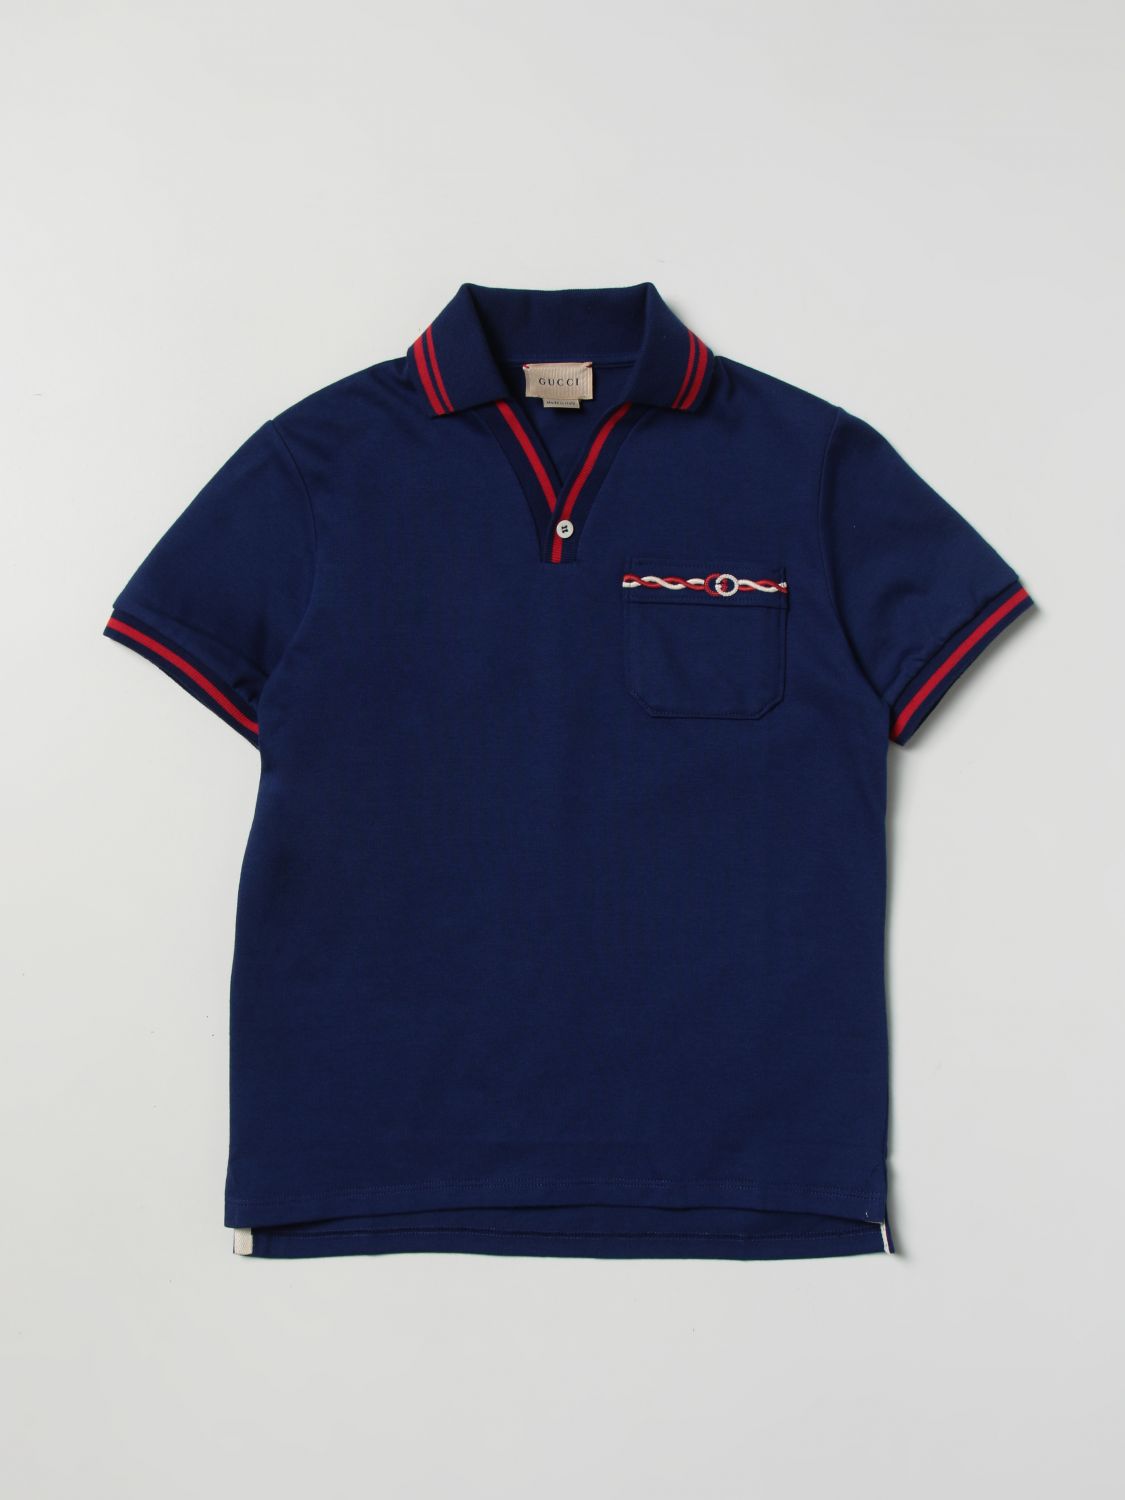 GUCCI: polo shirt for boys - Blue | Gucci polo shirt 711542XJEMD online on  